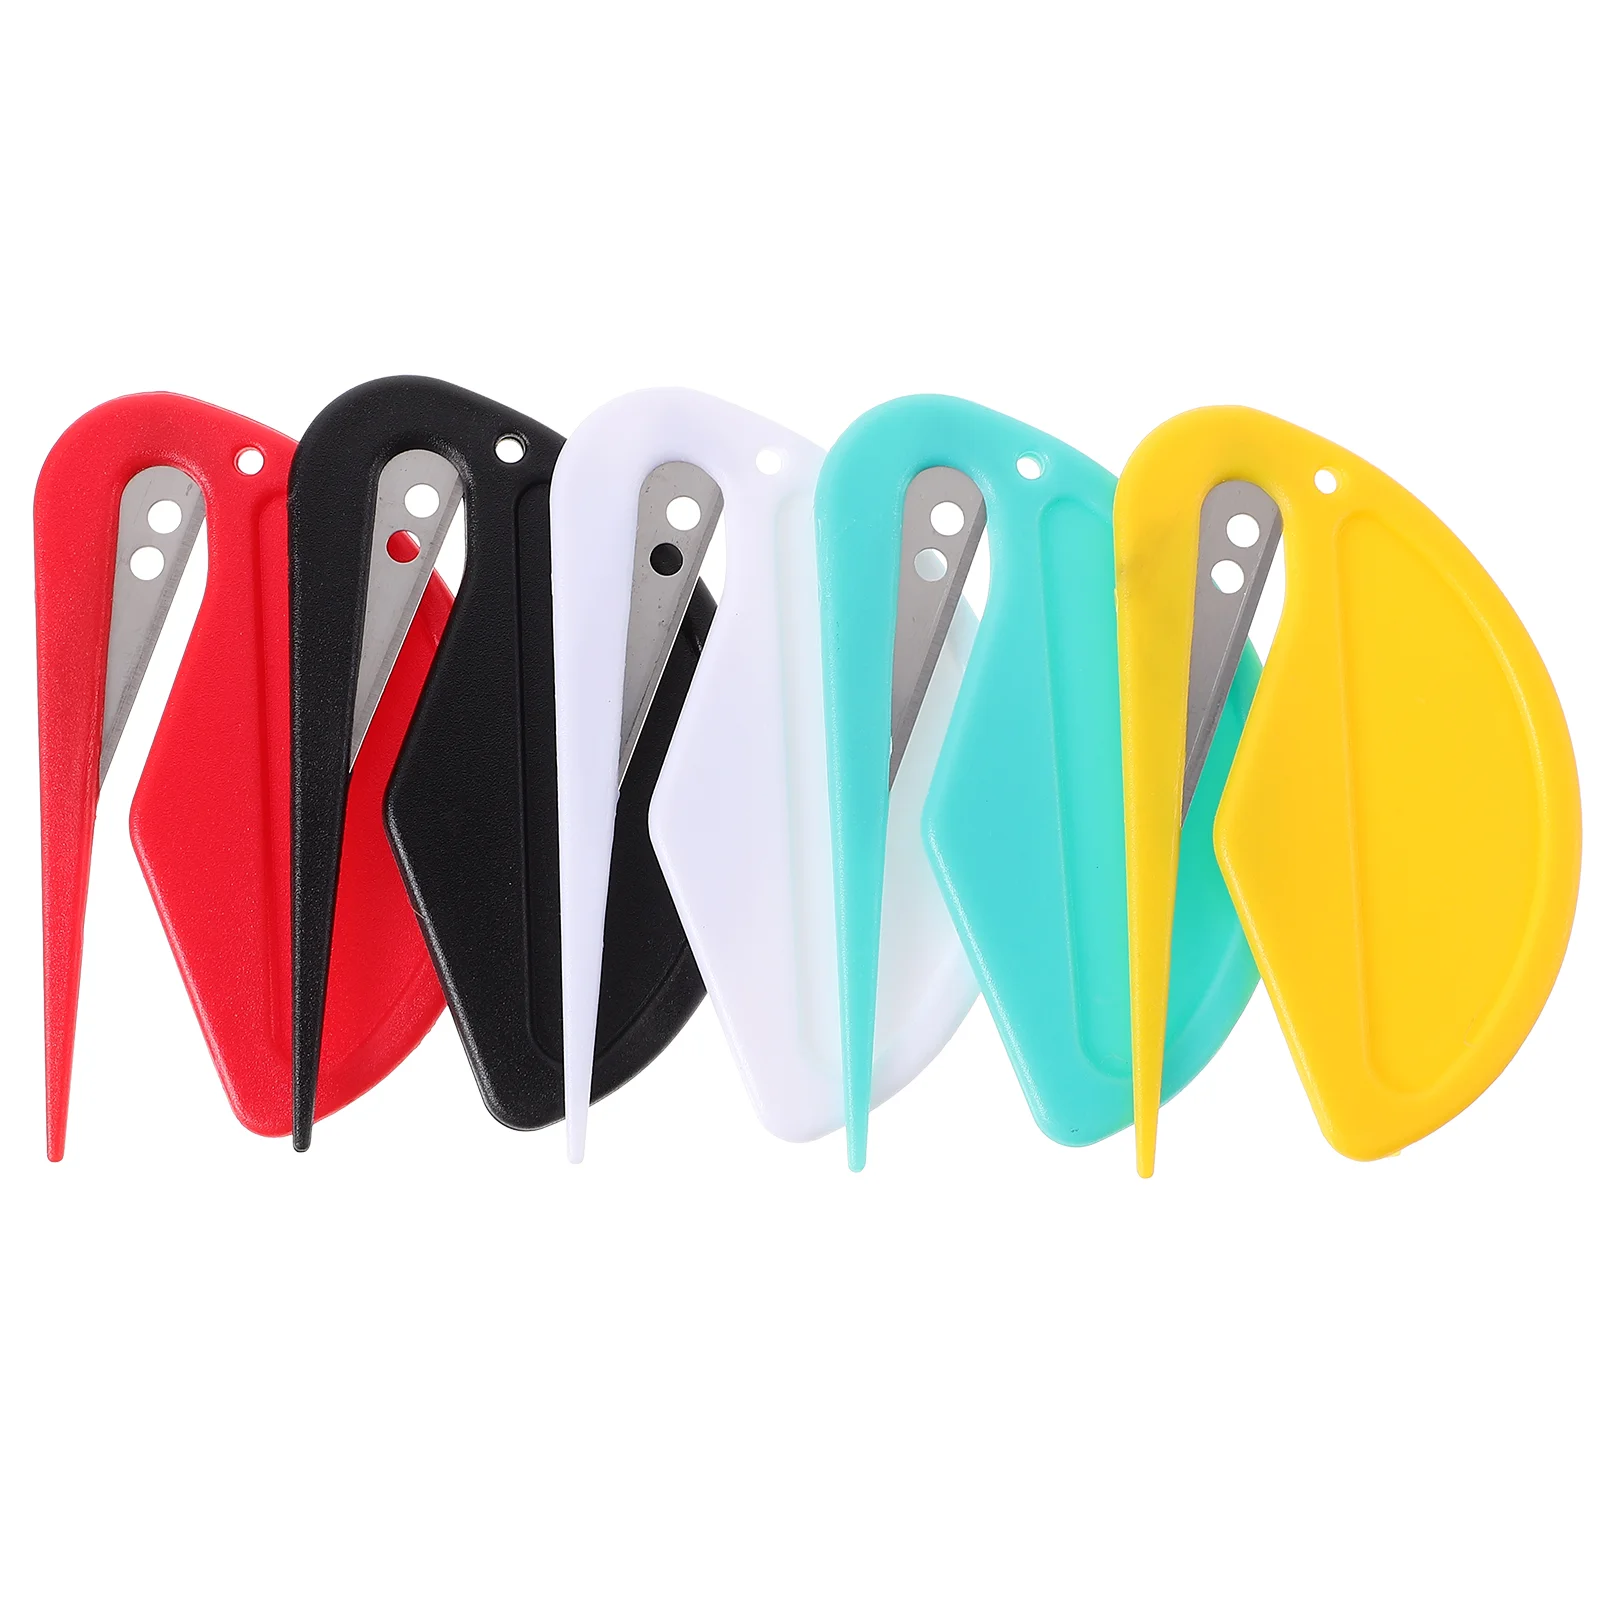 50pc bubble mail clip paper envelope lining poly mail self styled black mail mail clip envelope bubble paper mail courier bag Letter Opener Envelope Slitter Mail Opener Portable Box Small Cutter Envelope Opening Tool for Delivery Envelope Package